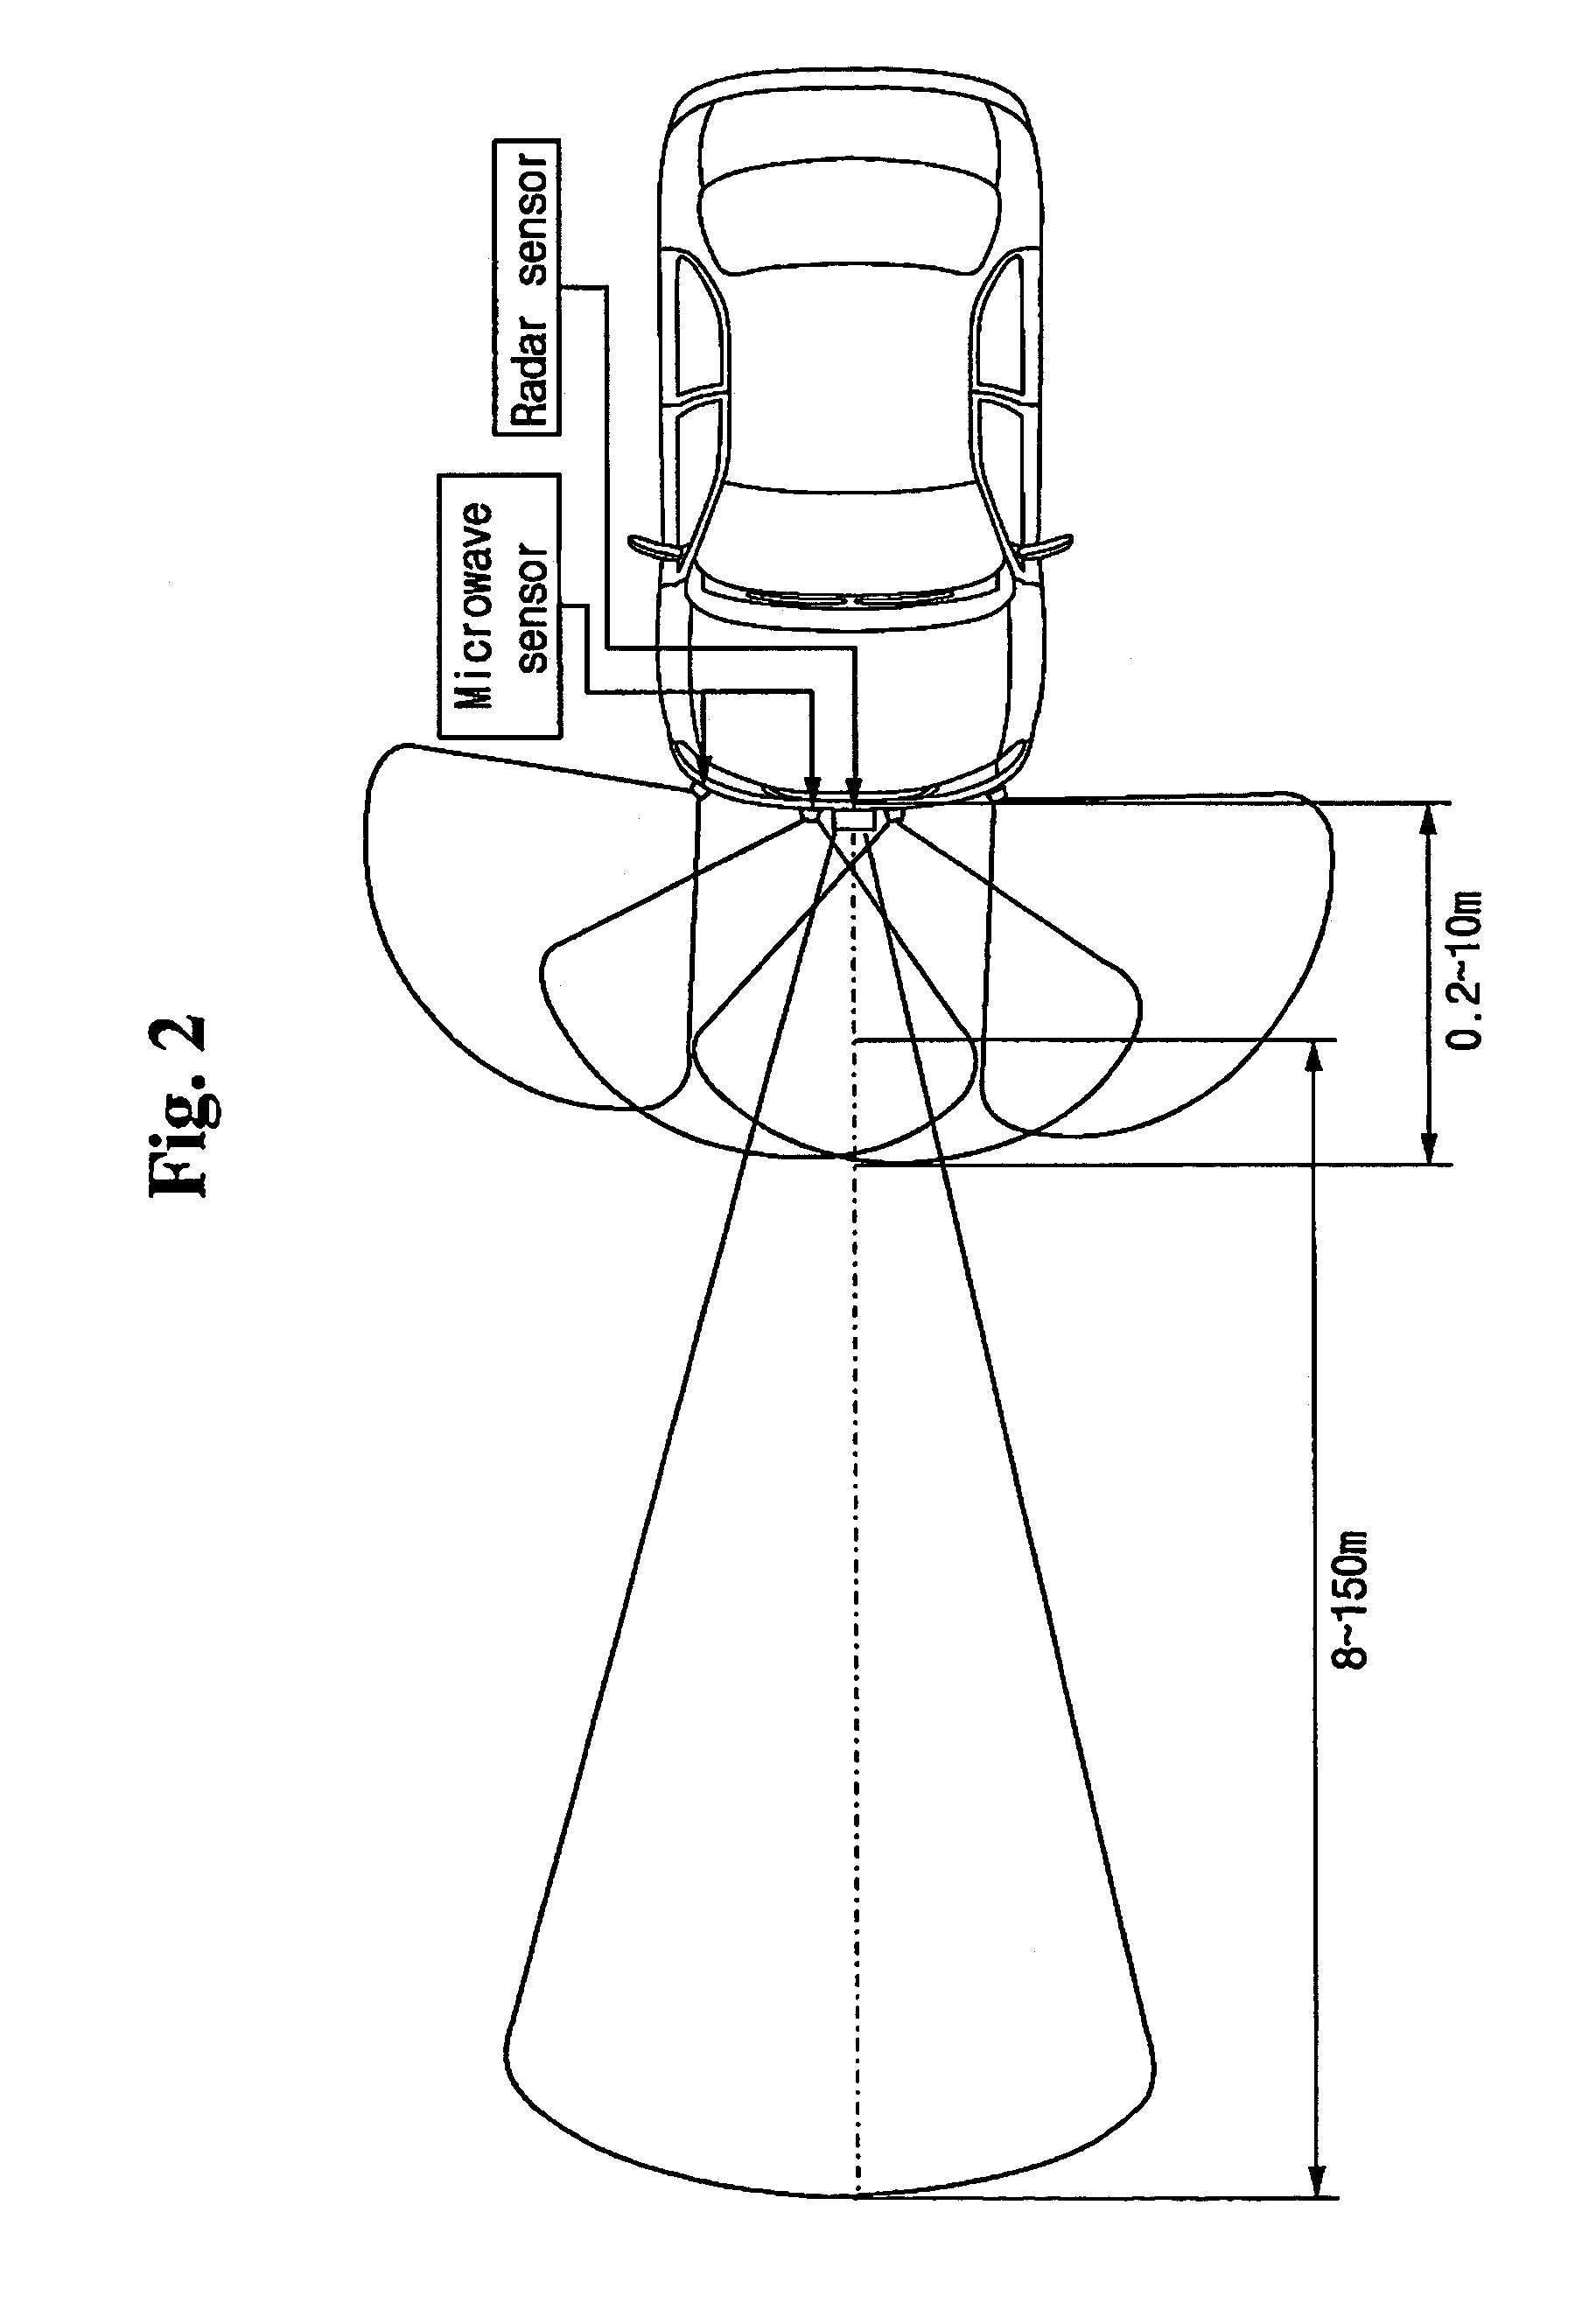 Apparatus for controlling distance between vehicles